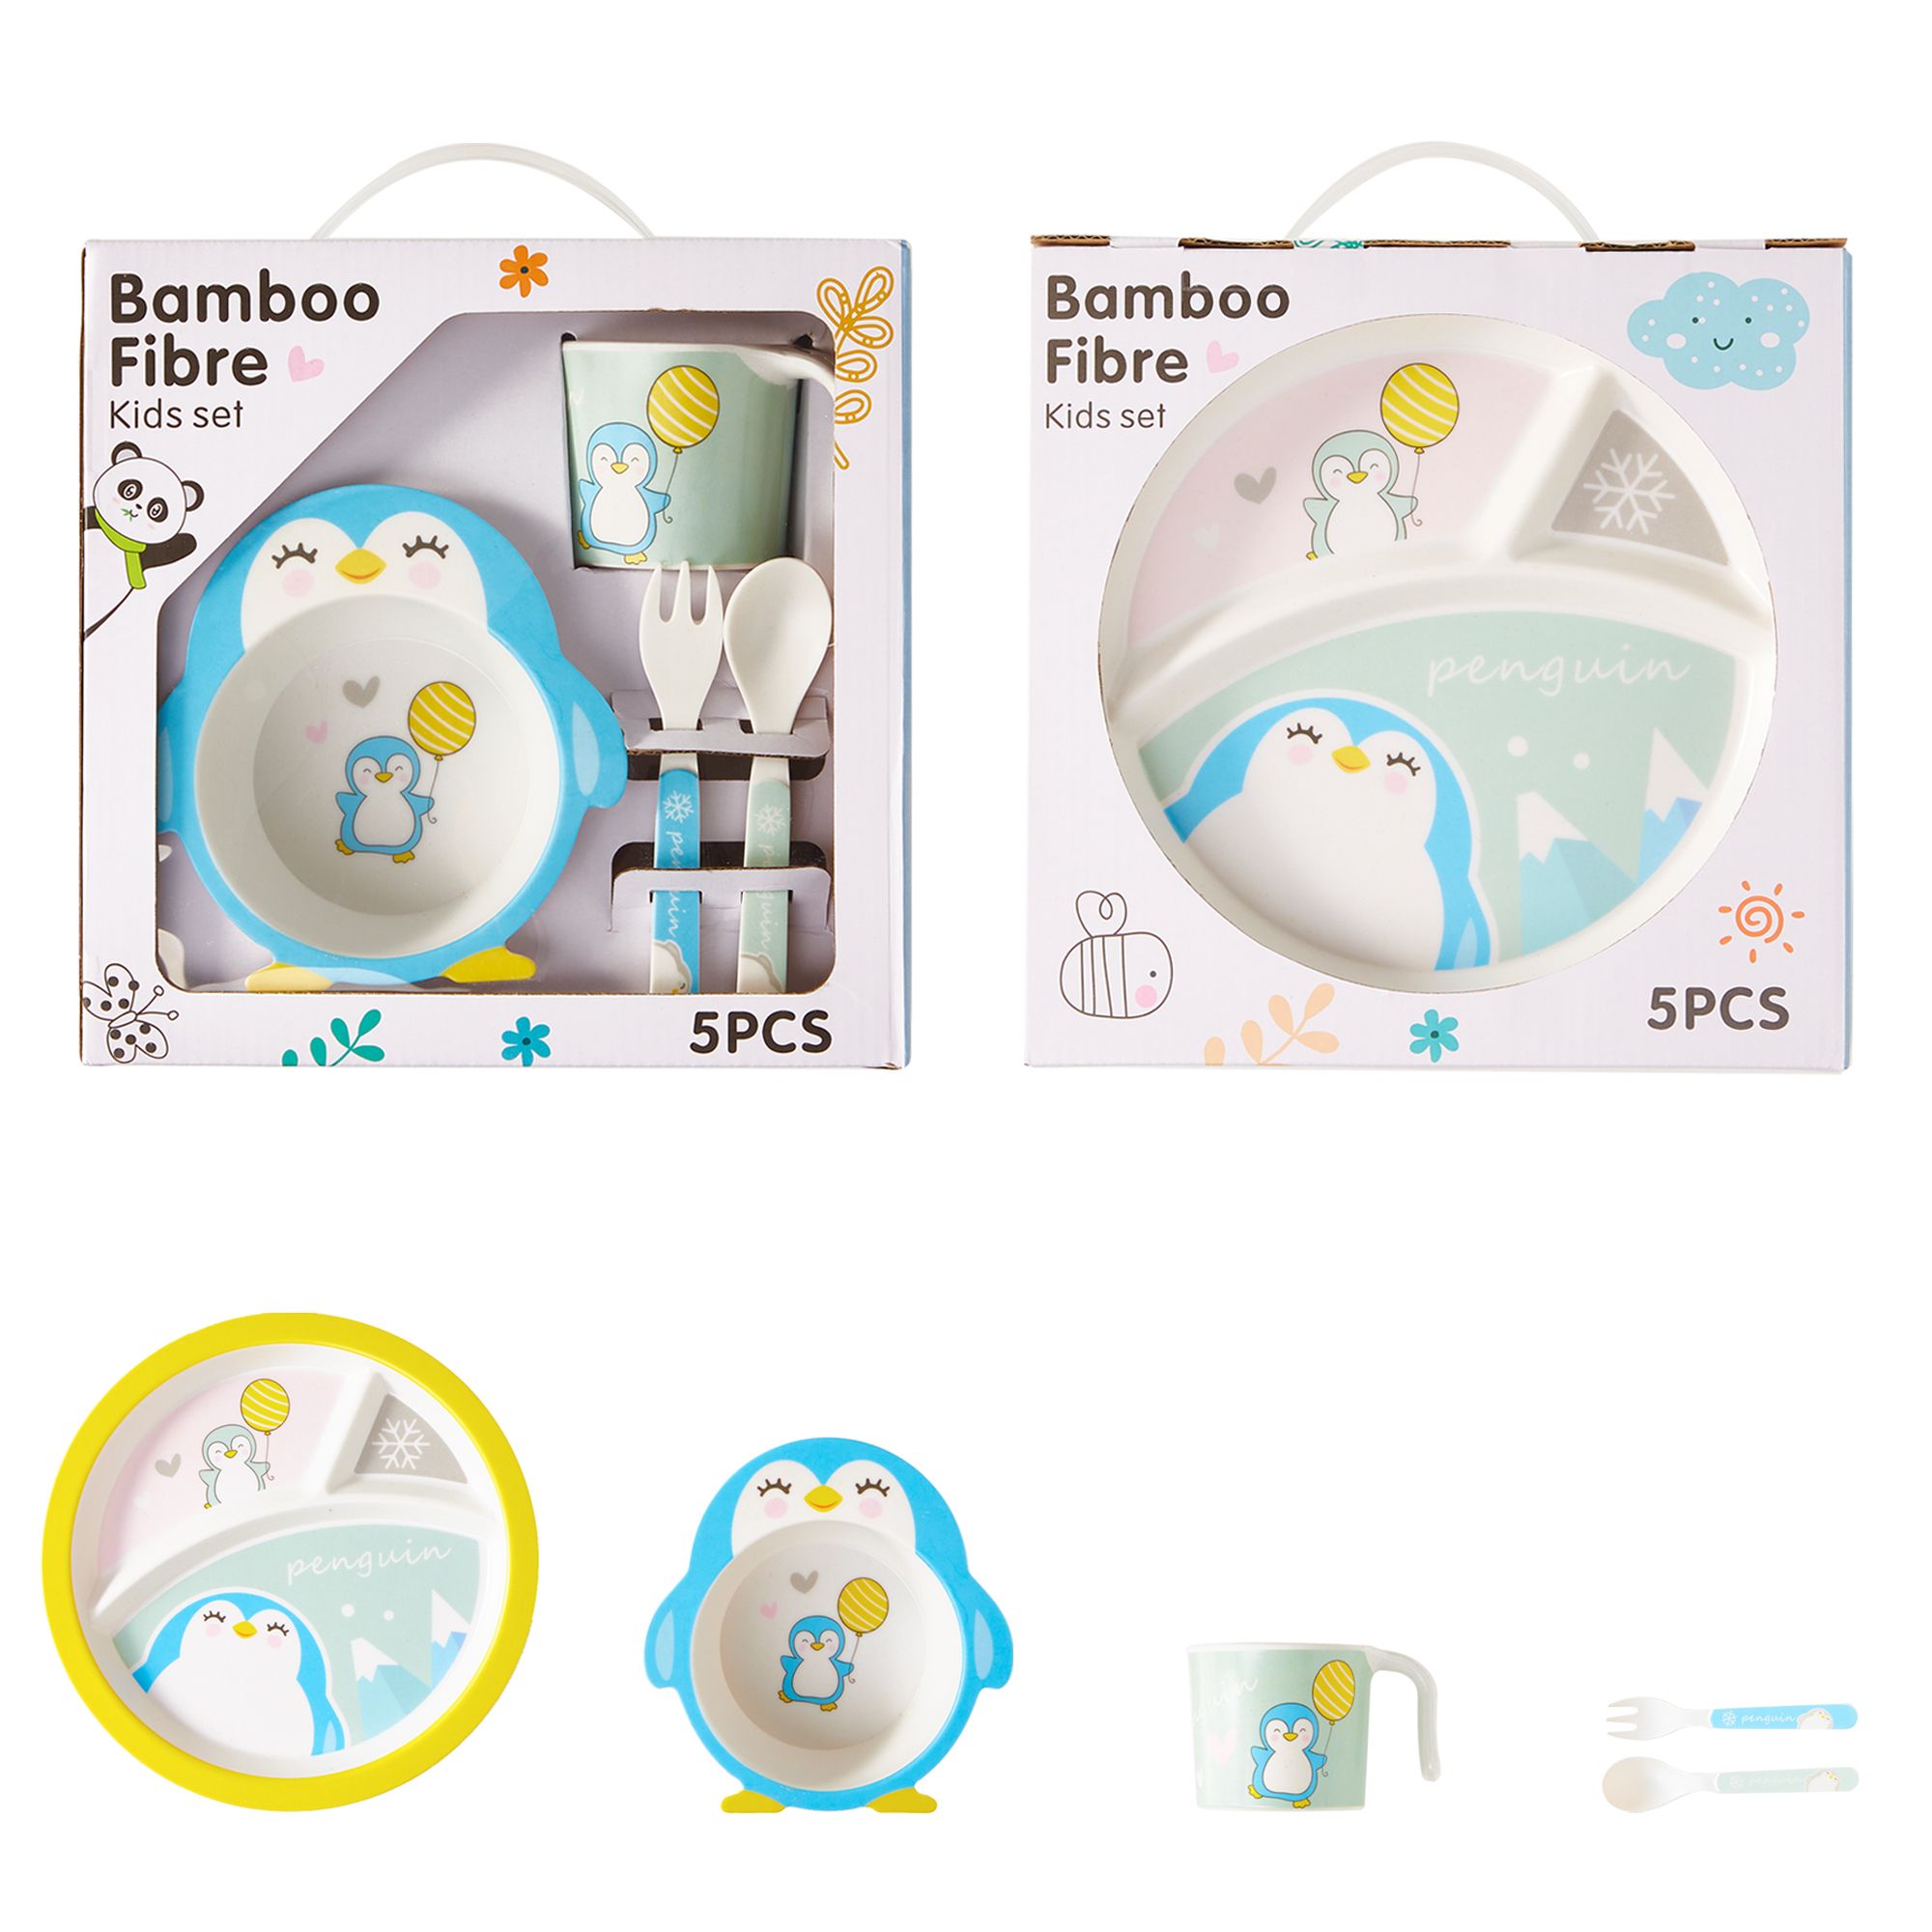 Bamboo Fiber Kids Tableware Set - 5-Piece Gift Box With Plate, Bowl, Cup, Spoon, And Fork